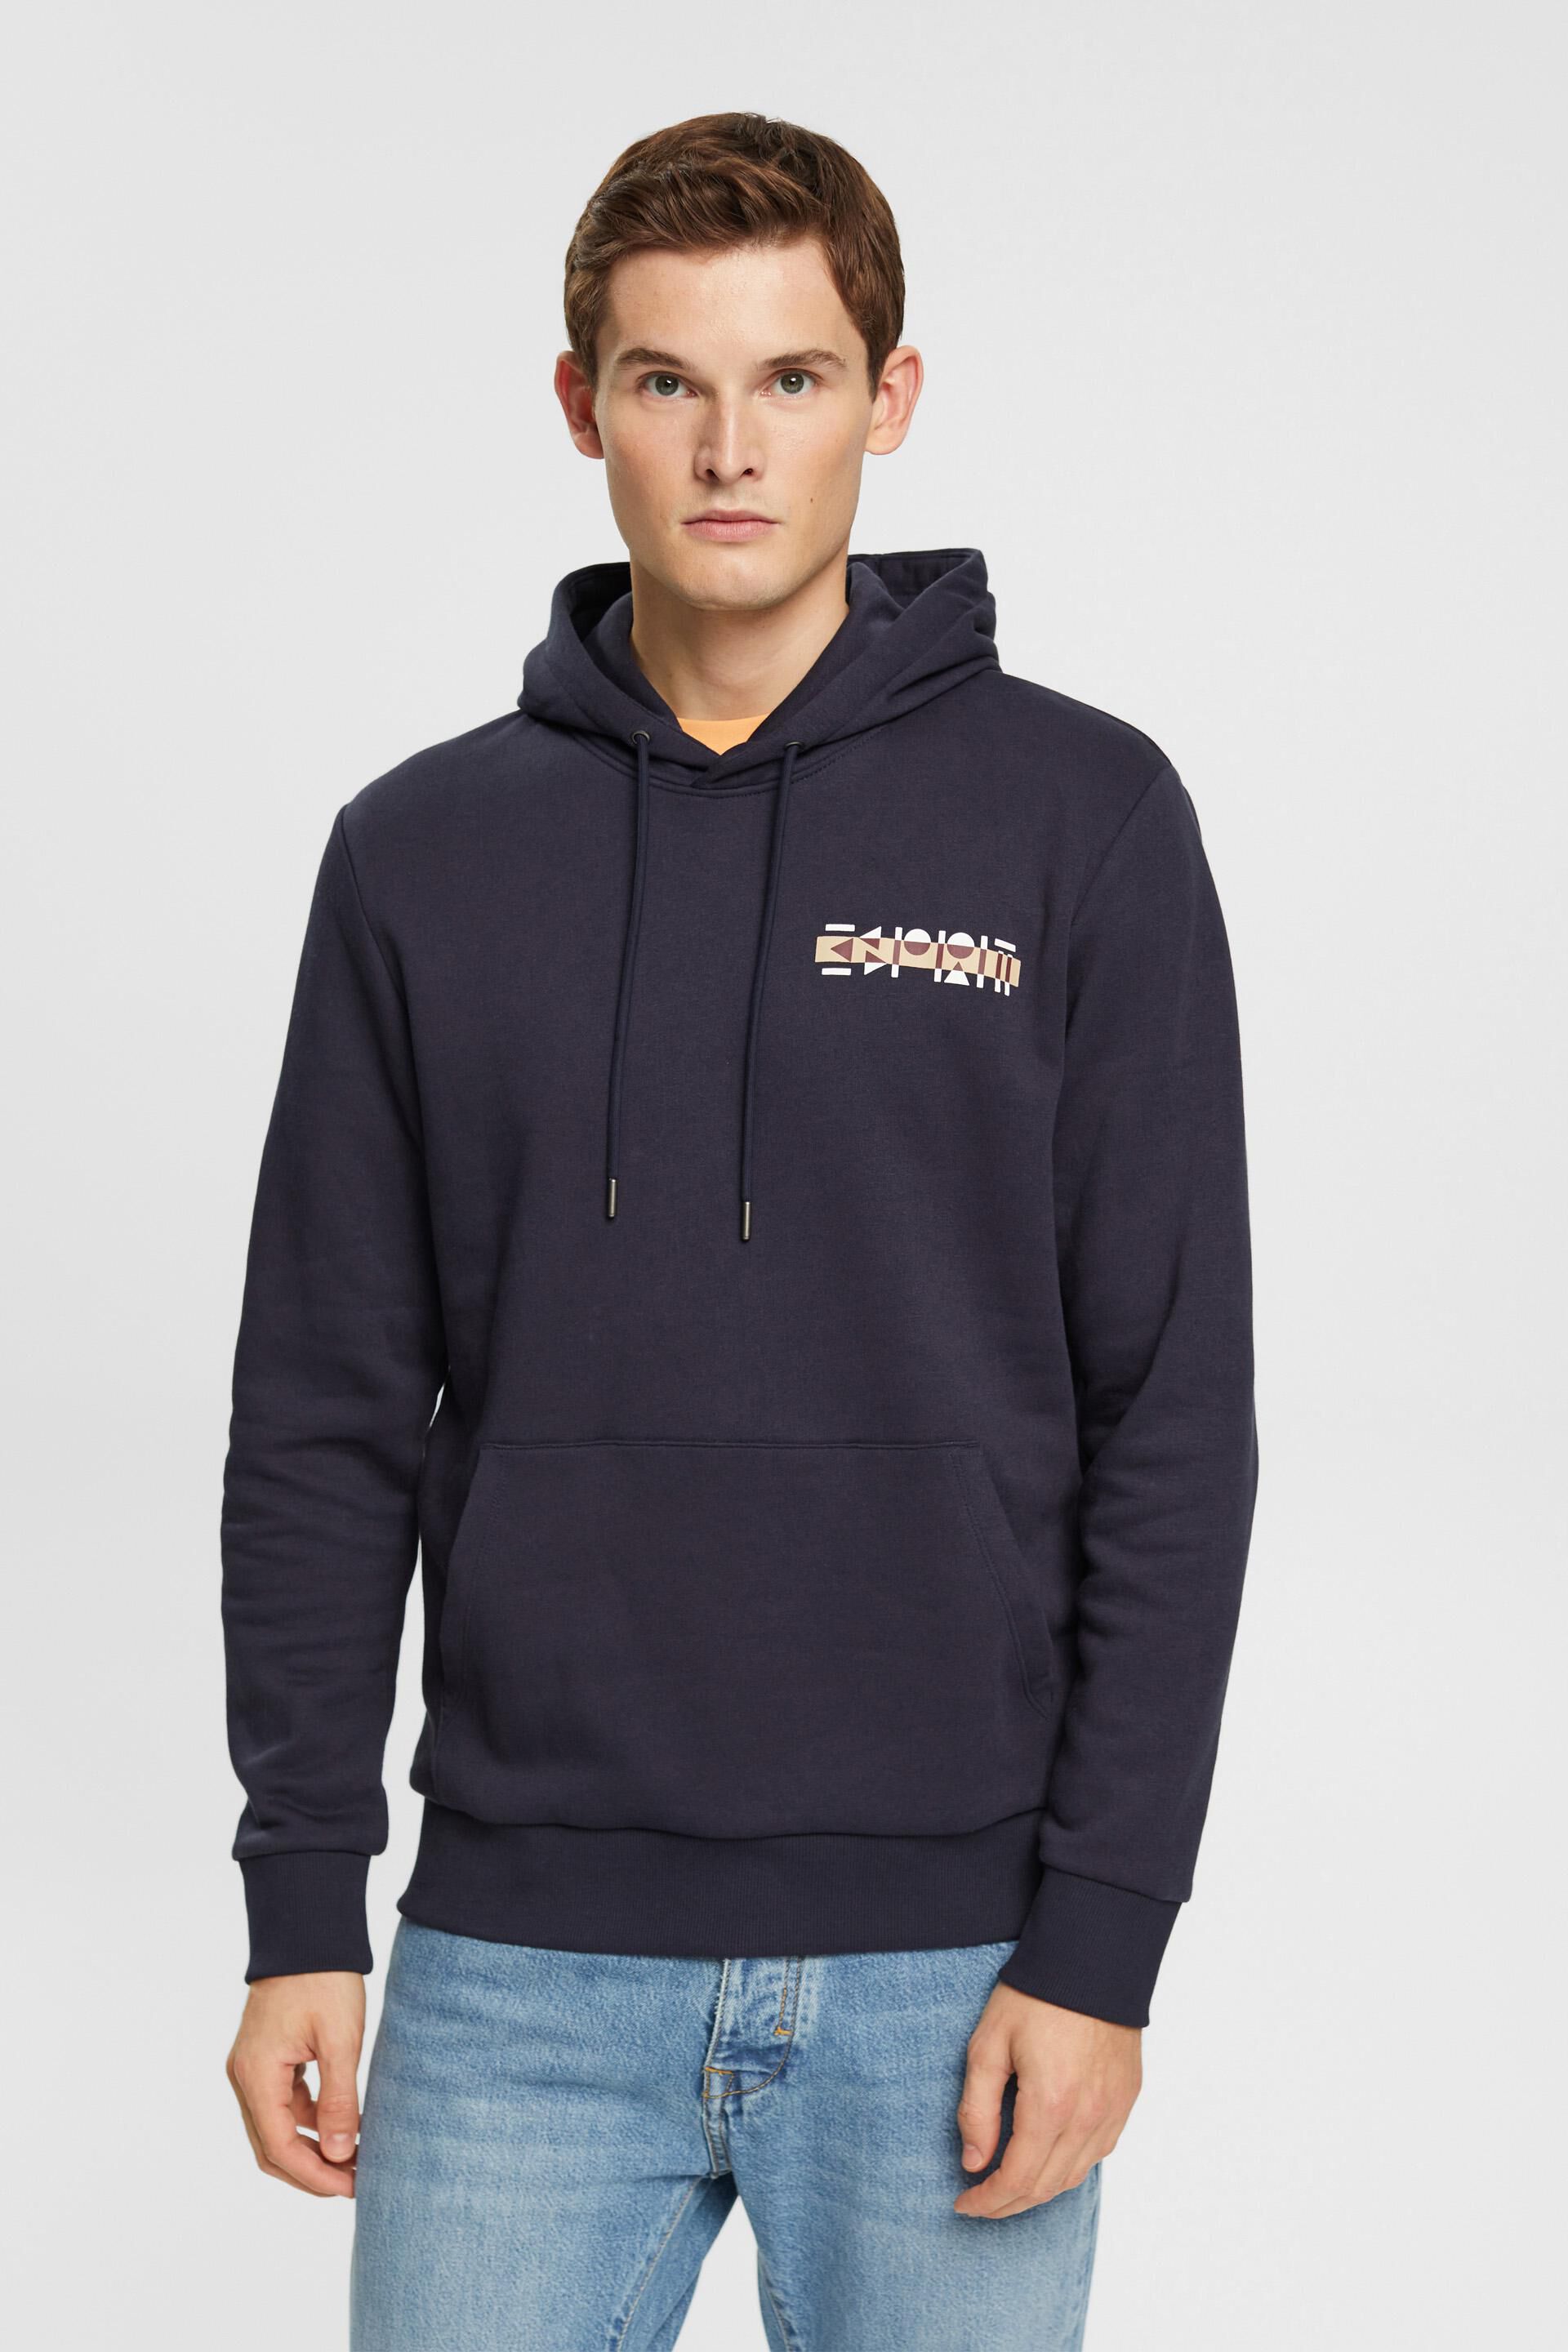 Esprit with small print logo Hoodie